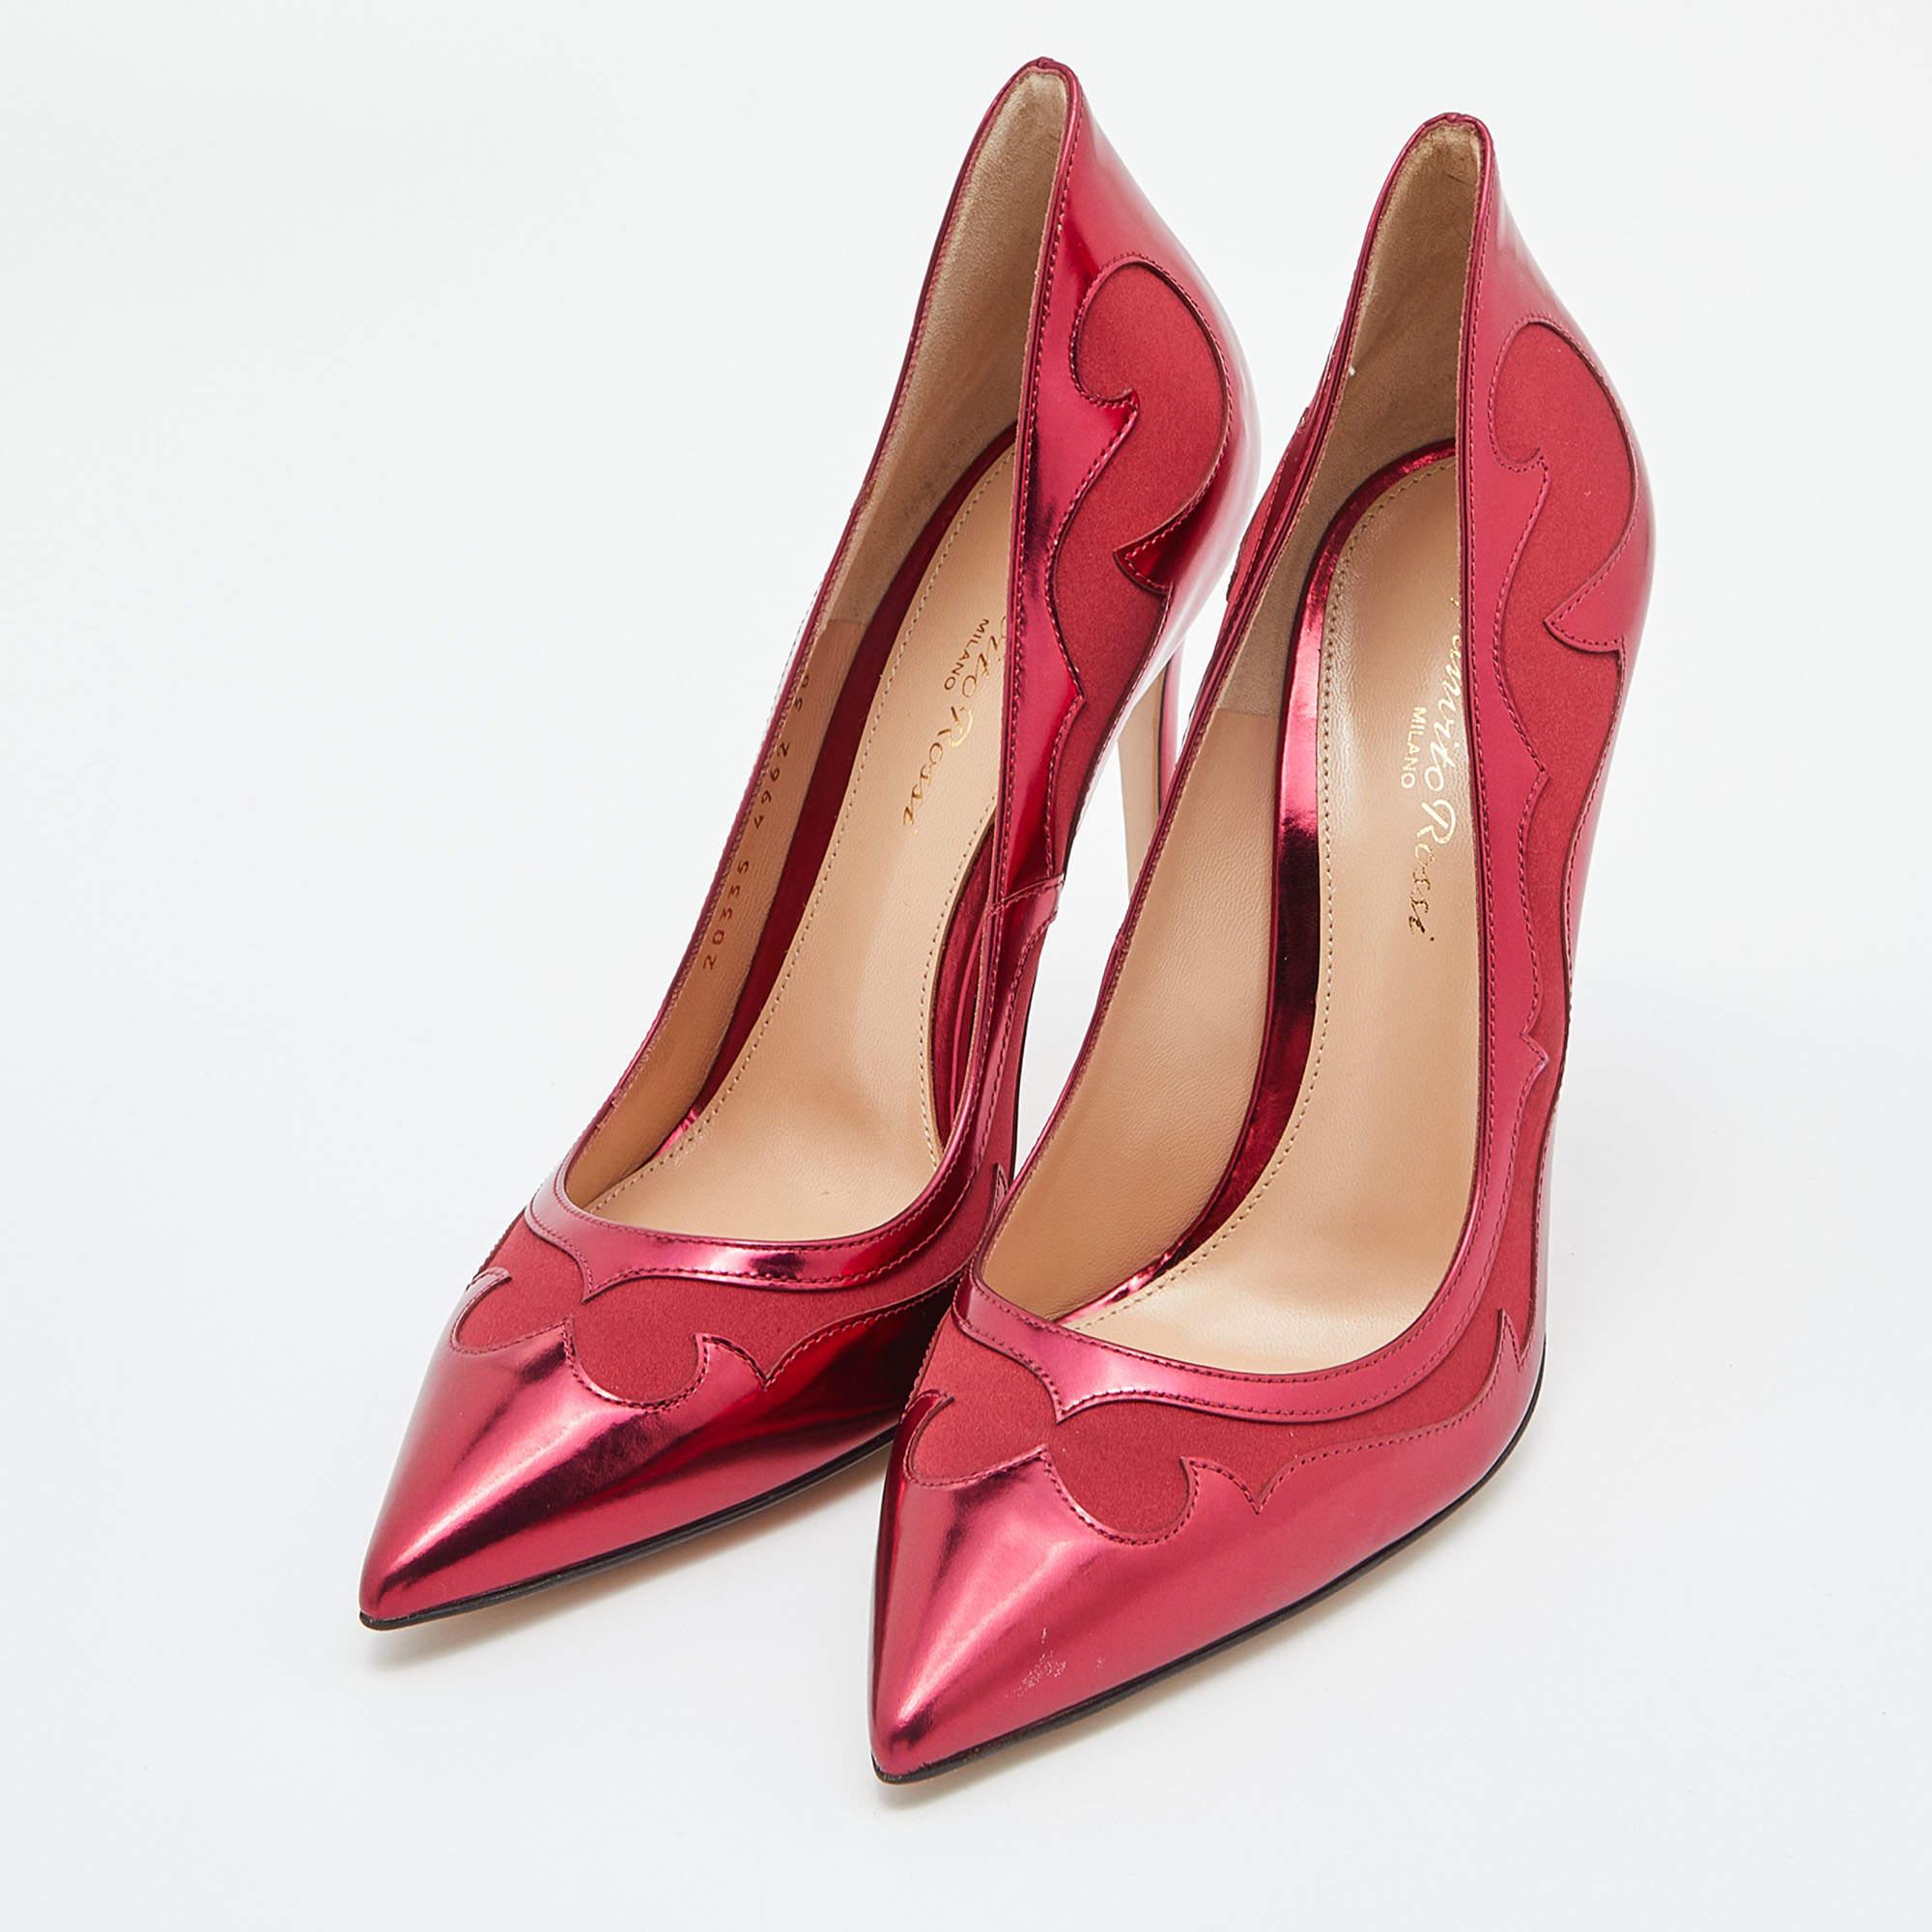 Gianvito Rossi Burgundy Laser Cut Leather and Satin Pointed Toe Pumps Size 38 In Good Condition For Sale In Dubai, Al Qouz 2